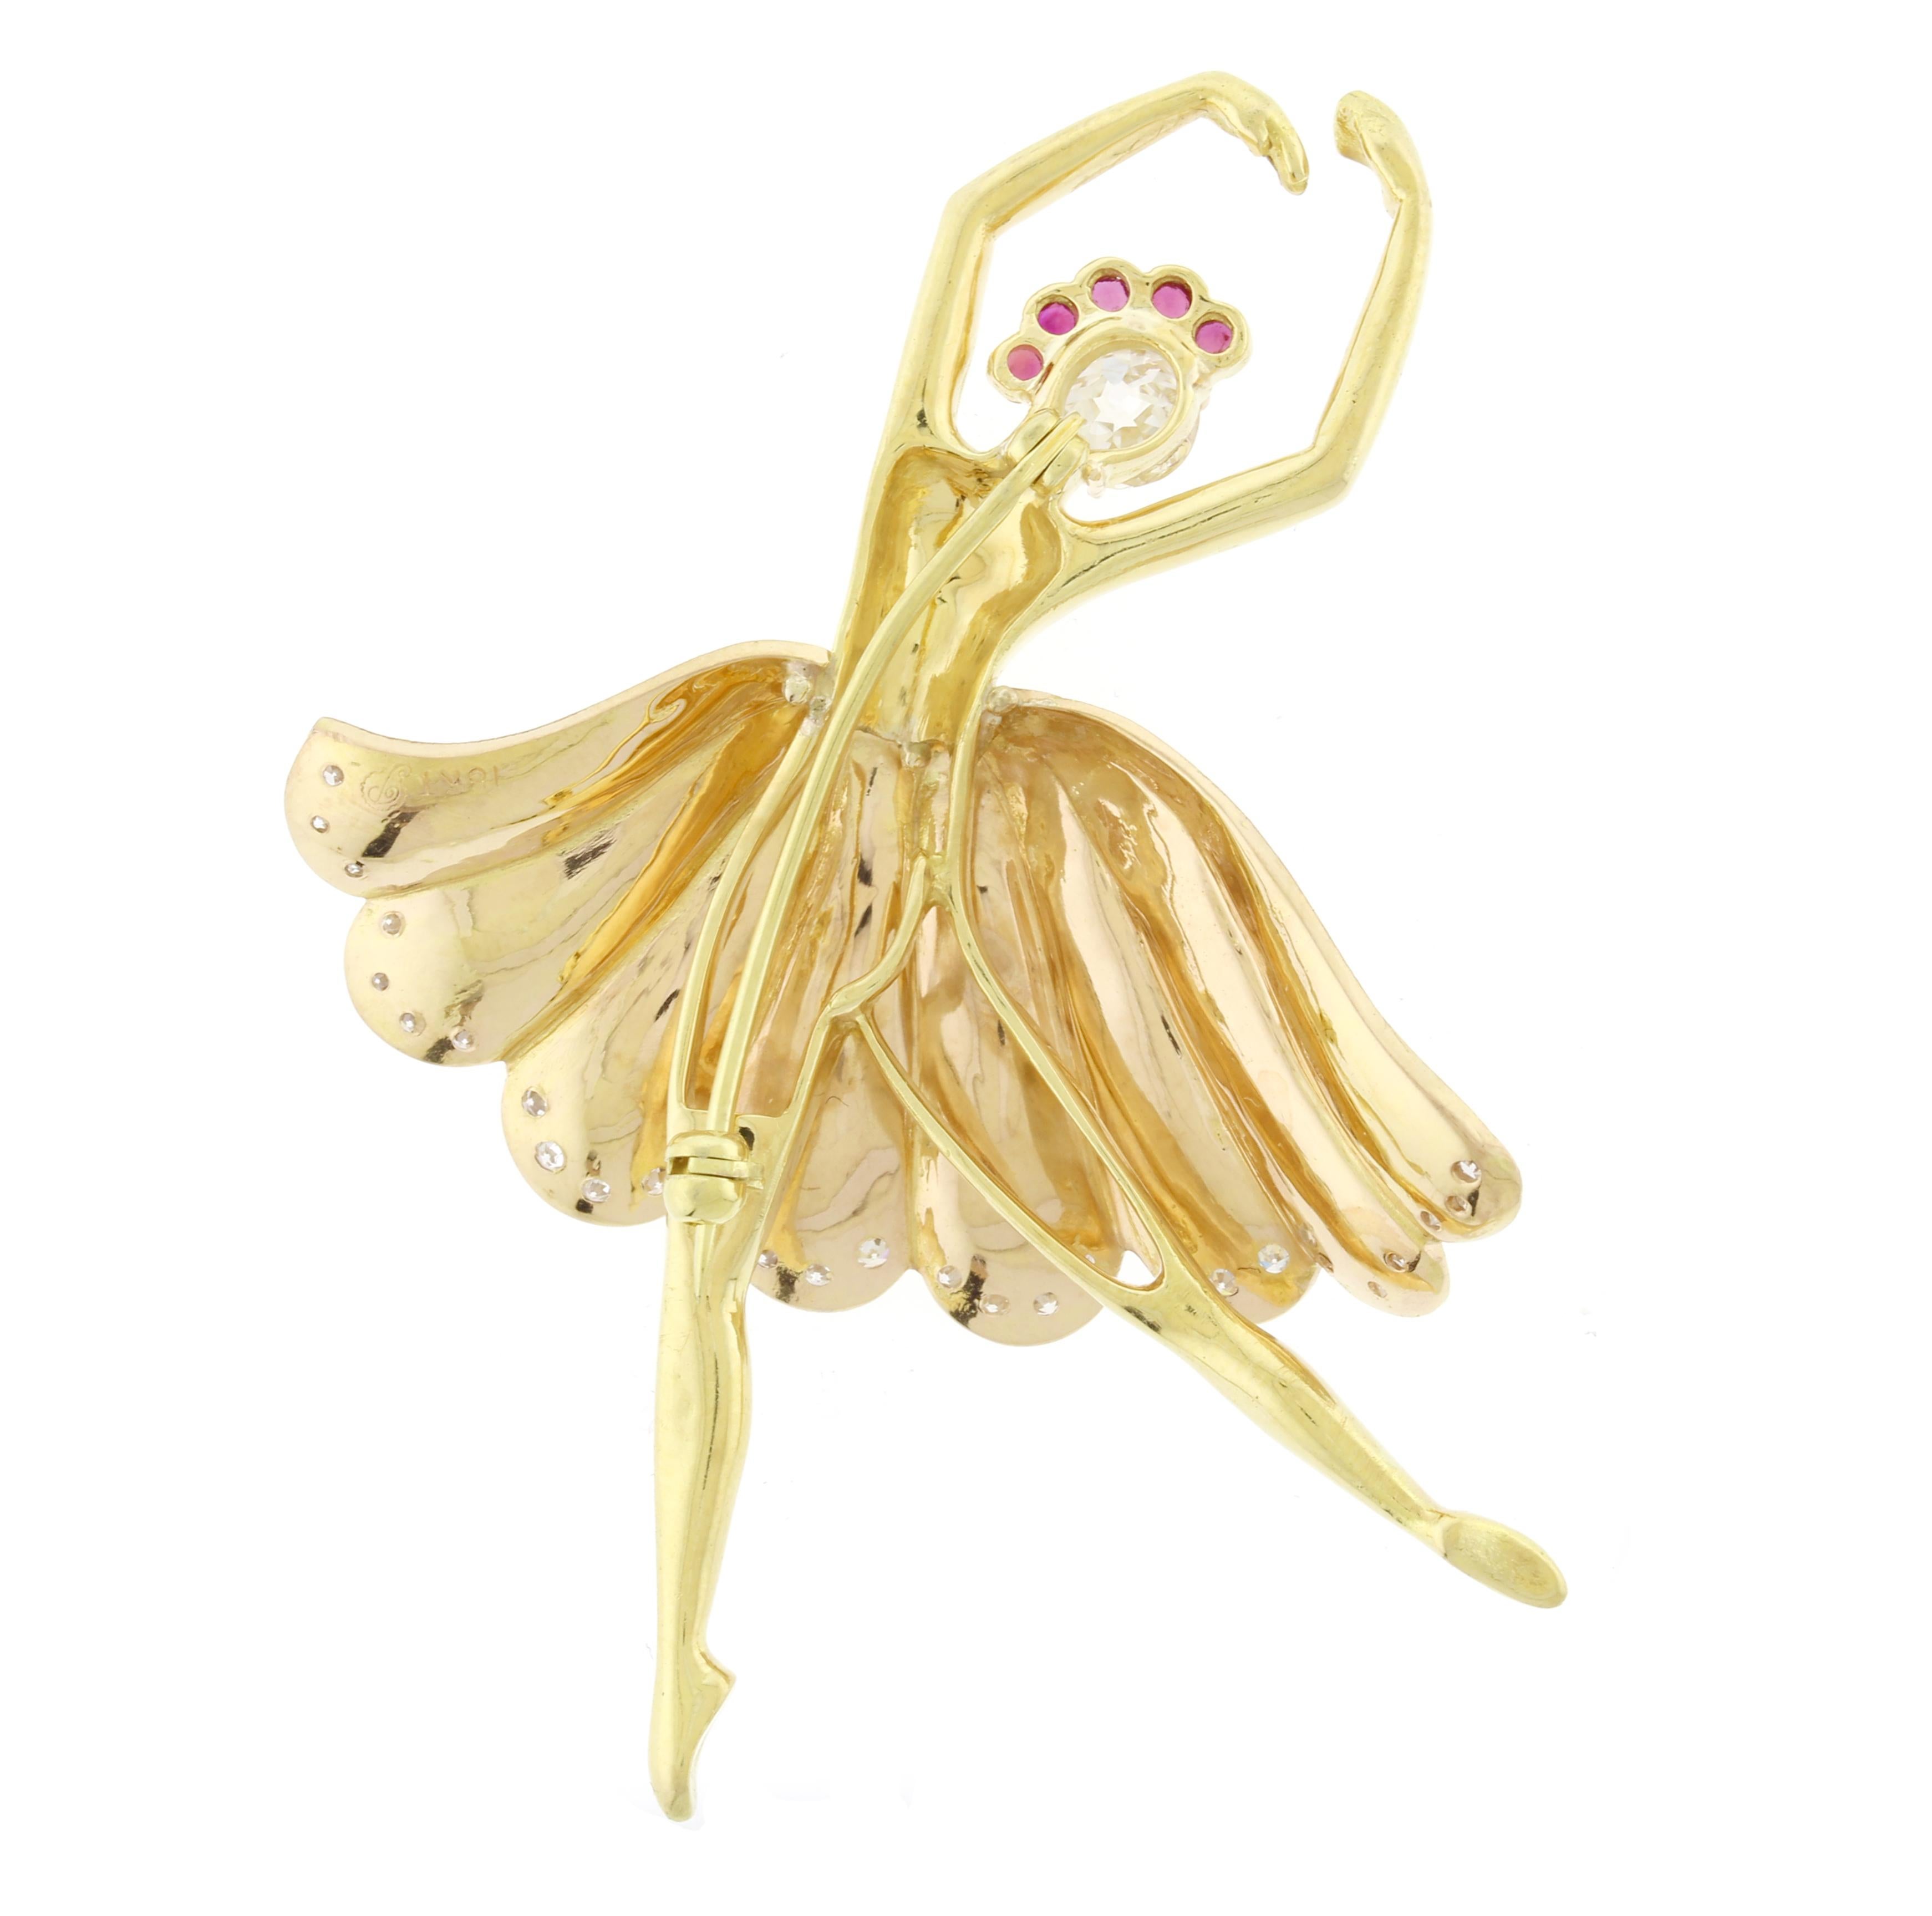 This elegant brooch was designed and made at Pampillonia Jewelers. The skirt is done in a matte finished rose gold with the bottom outlined in diamonds.
• Metal: 18kt  Rose Gold and Yellow Gold
• Designer: Pampillonia Jewelers
• Circa: 2023
•